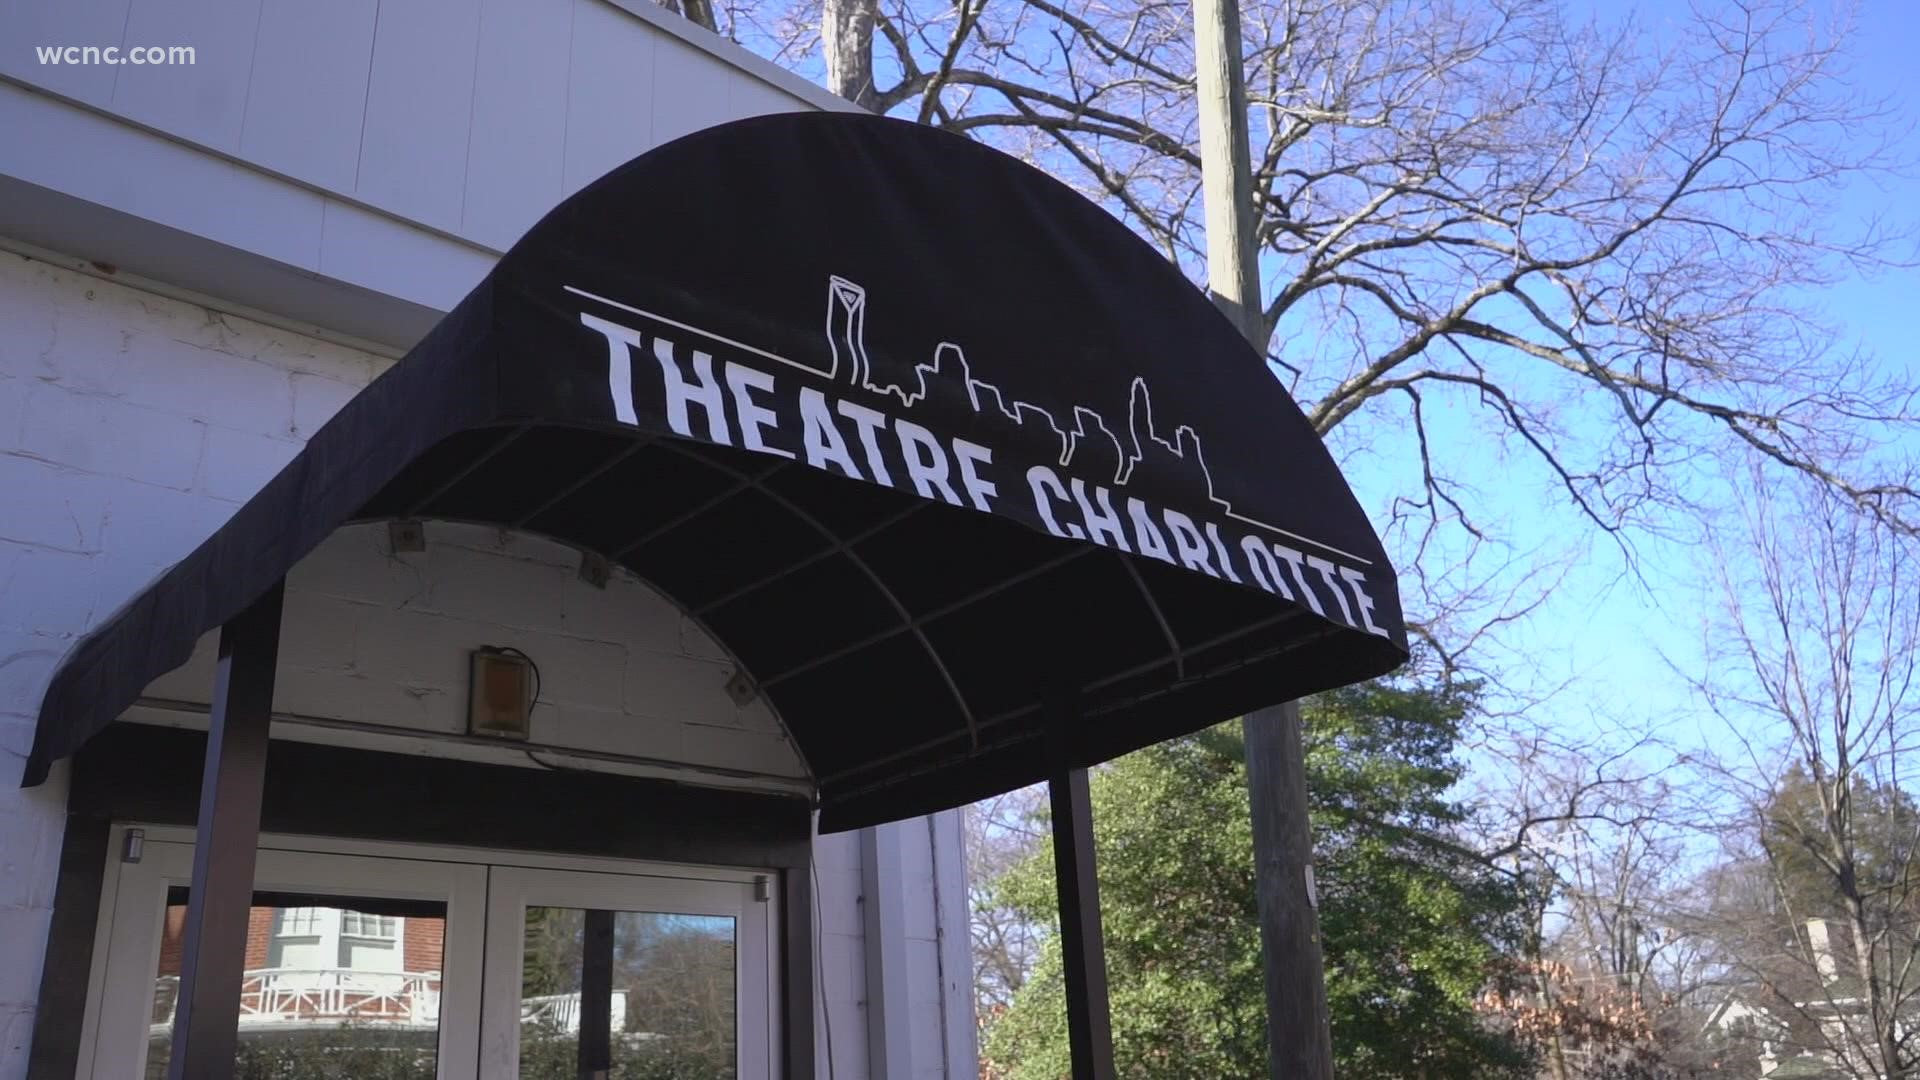 Theatre Charlotte was not only faced with the restrictions brought on by a pandemic, but an electrical fire damaged its physical space in Dec. 2020.